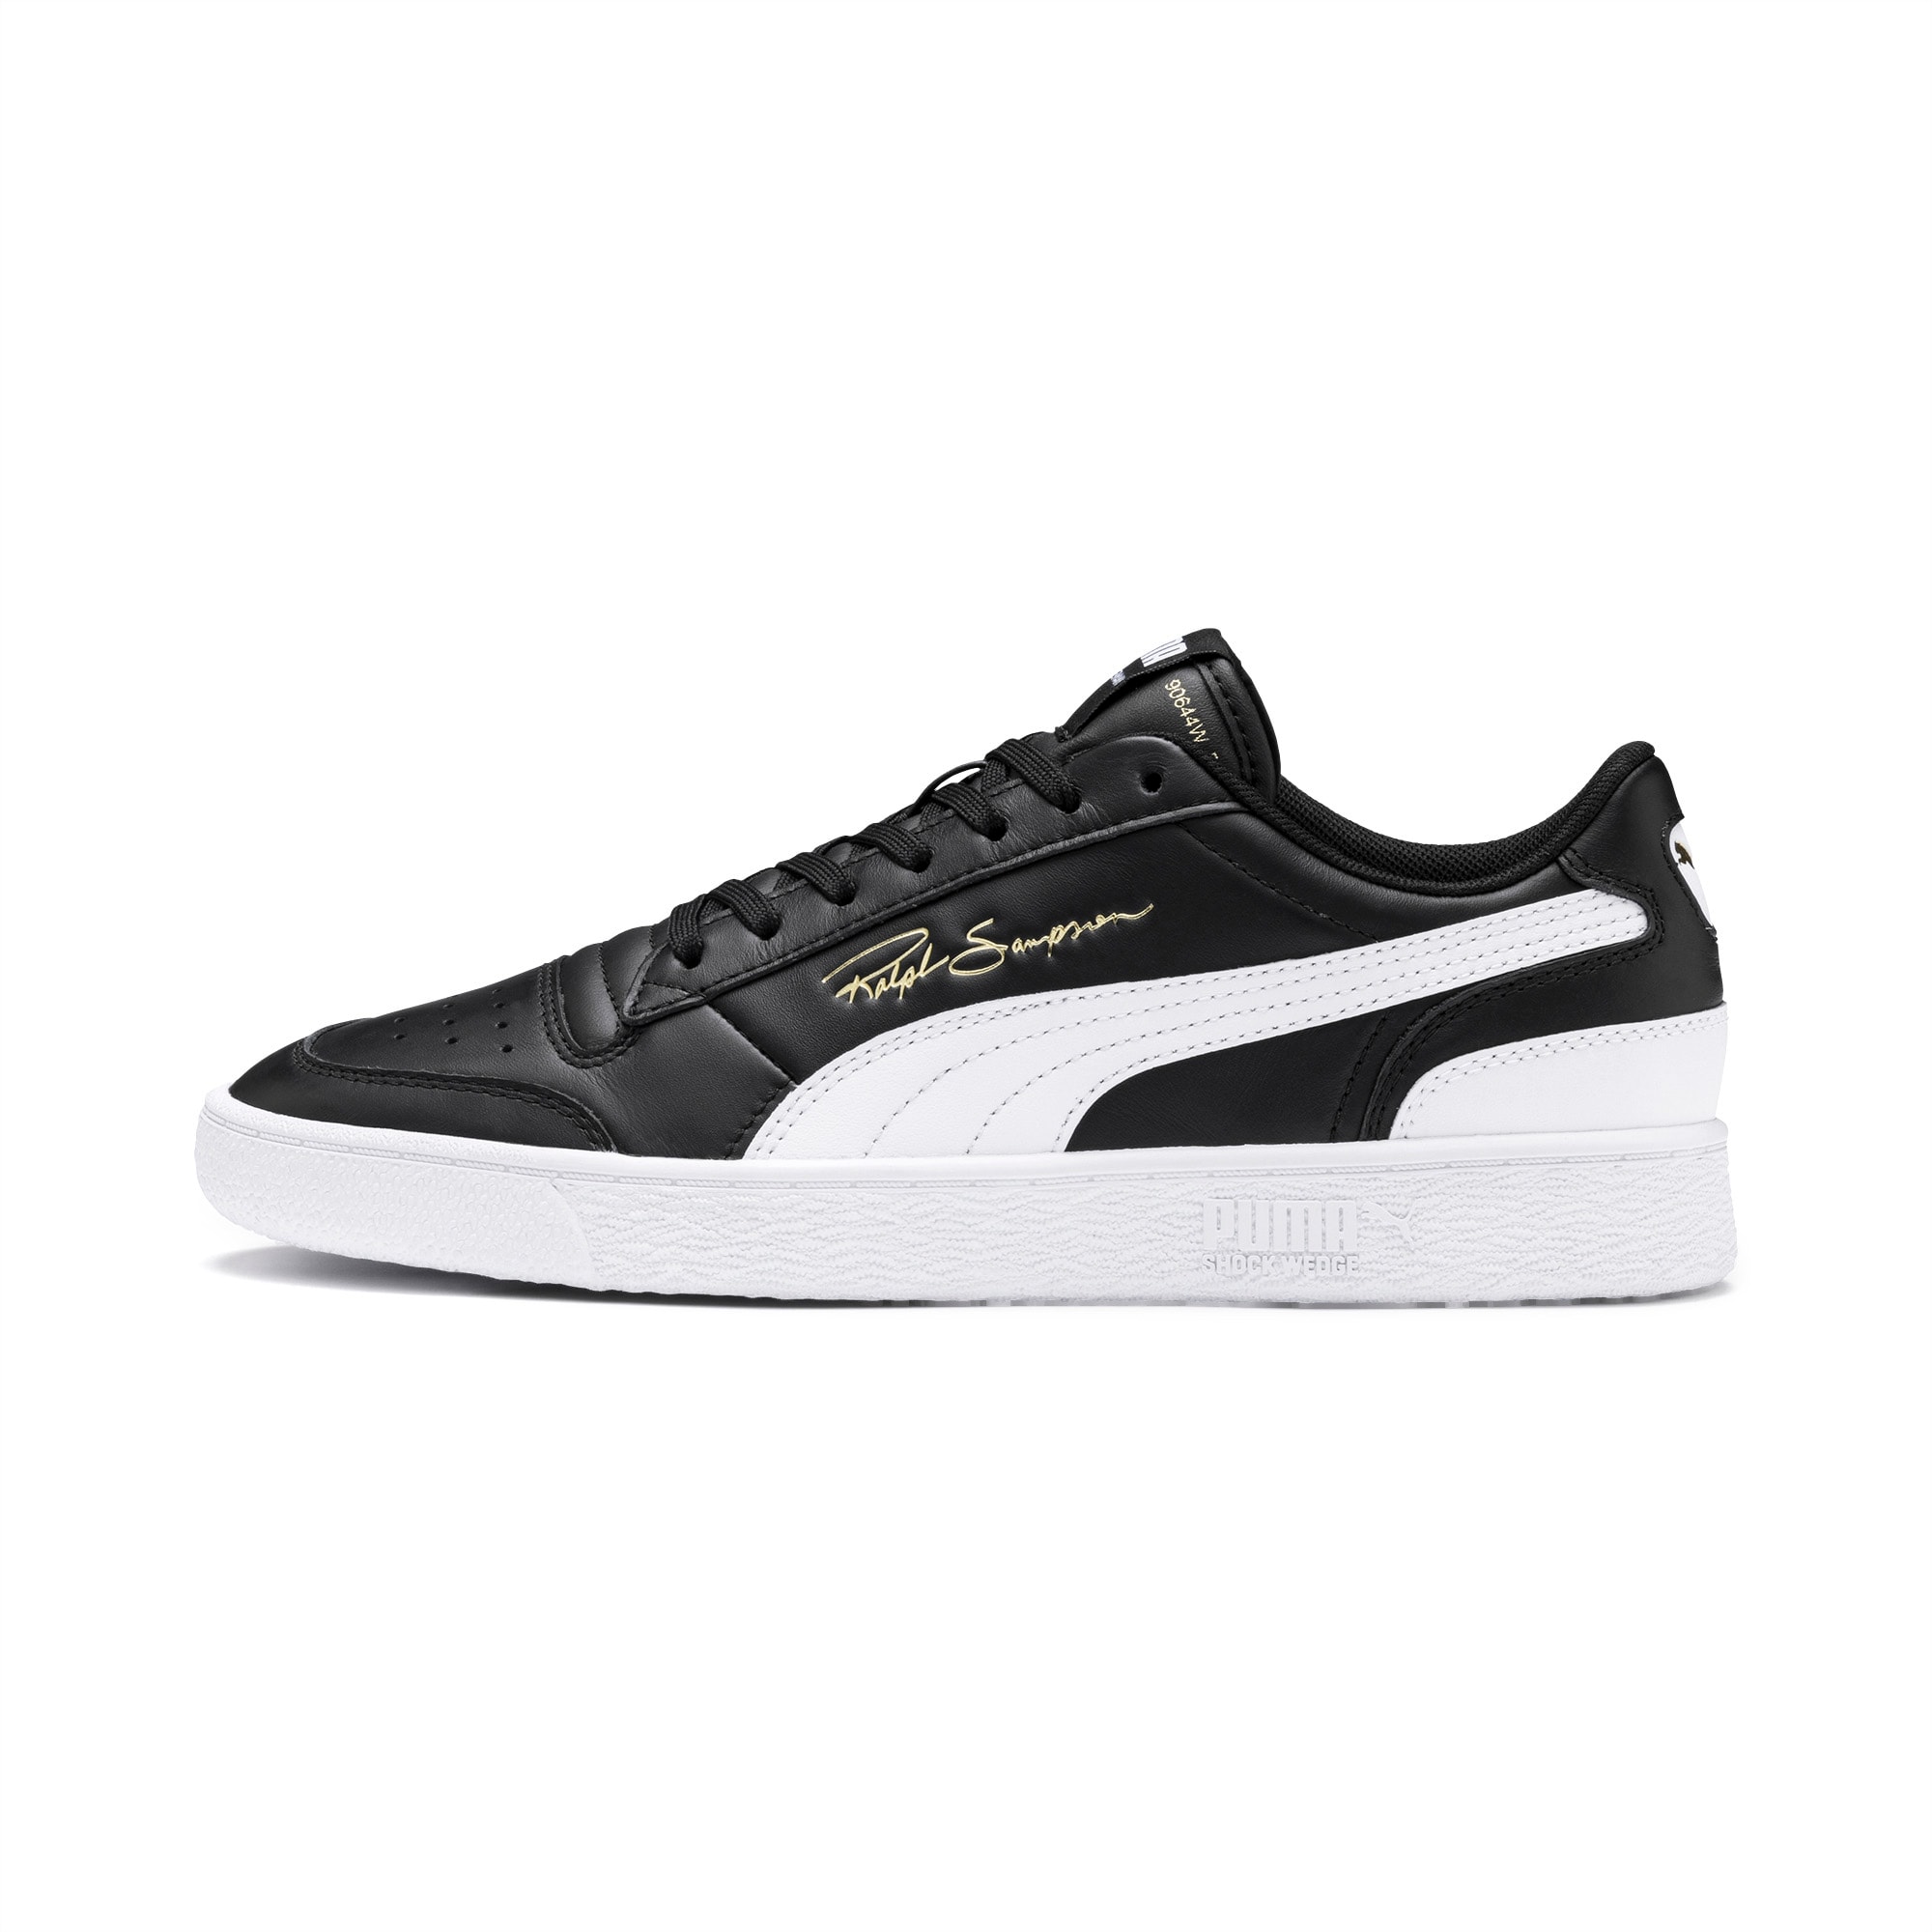 PUMA Chaussure Ralph Sampson Lo sneakers, Blanc/Noir, Taille 36, Chaussures